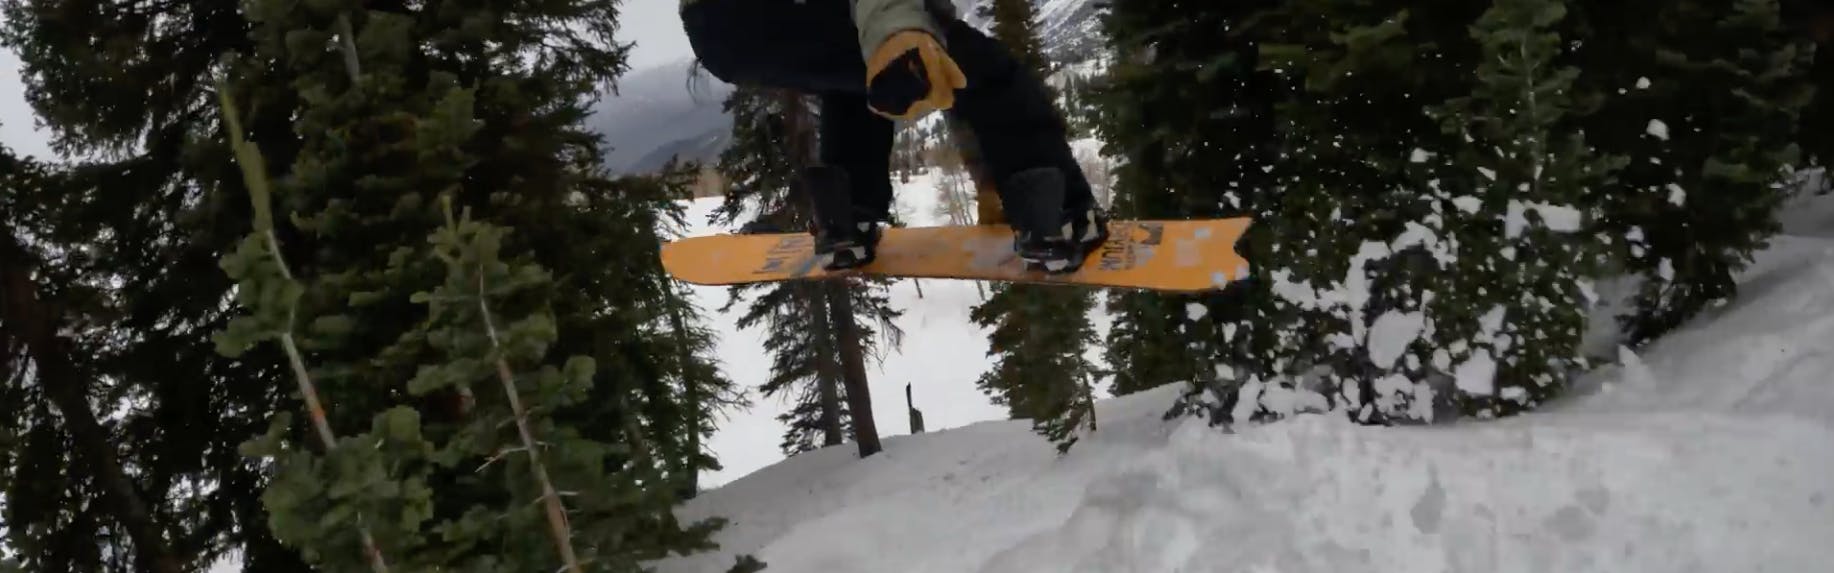 Snowboard Expert Spencer Storck jumping with the 2023 Nitro Dinghy snowboard